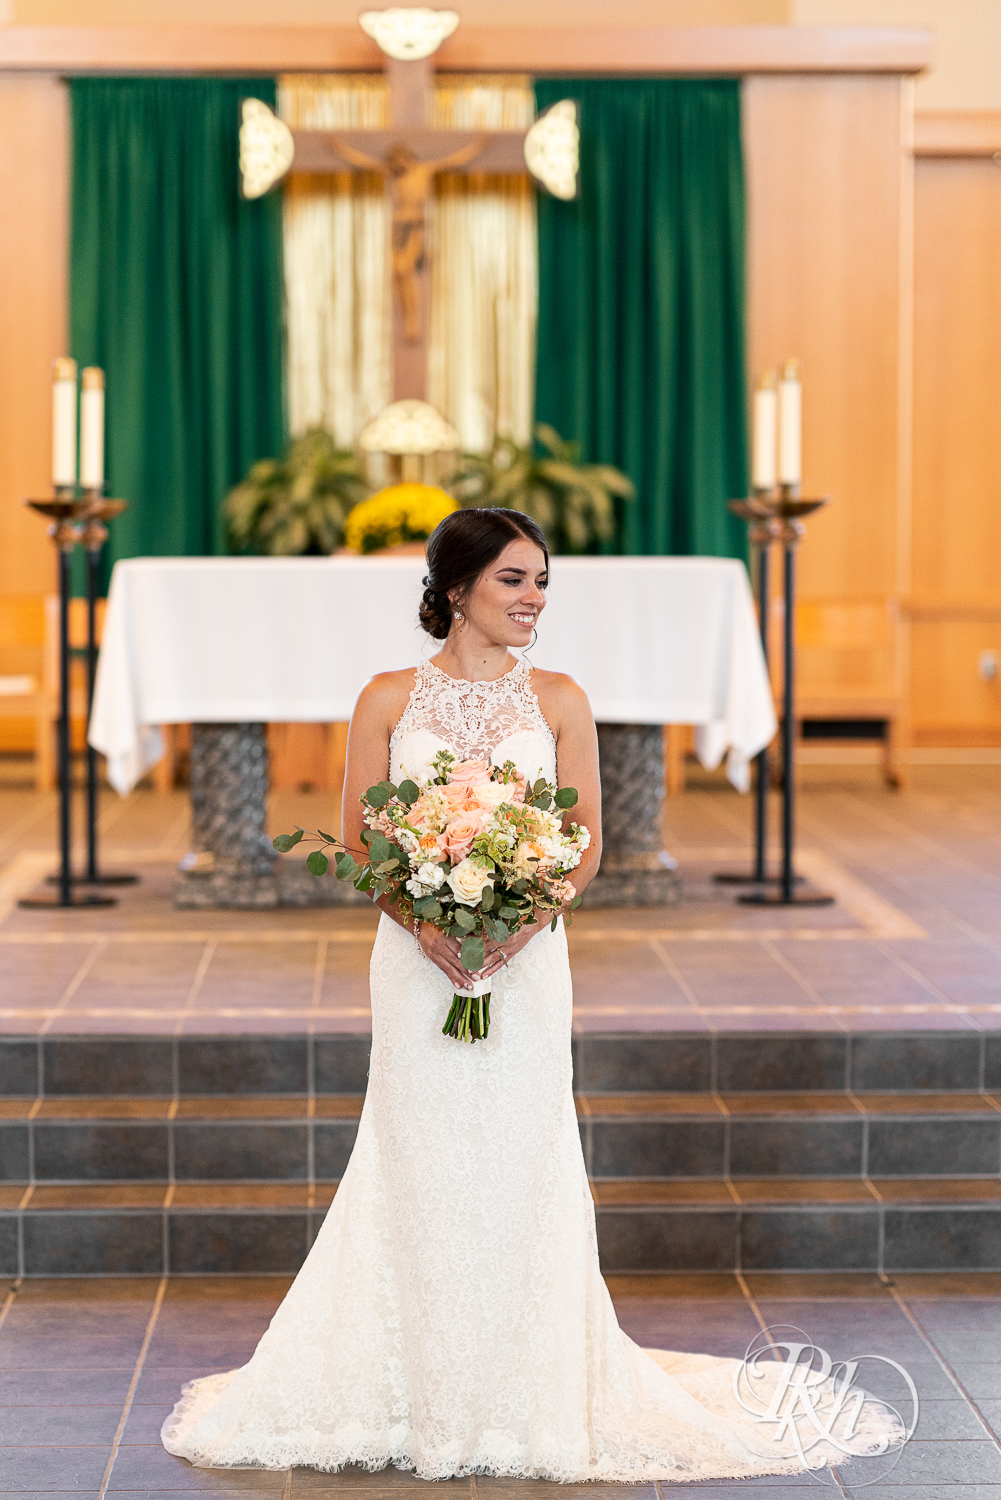 Bride holding flowers and looking to the left at Saint Joseph Catholic Church in Rosemount, Minnesota.